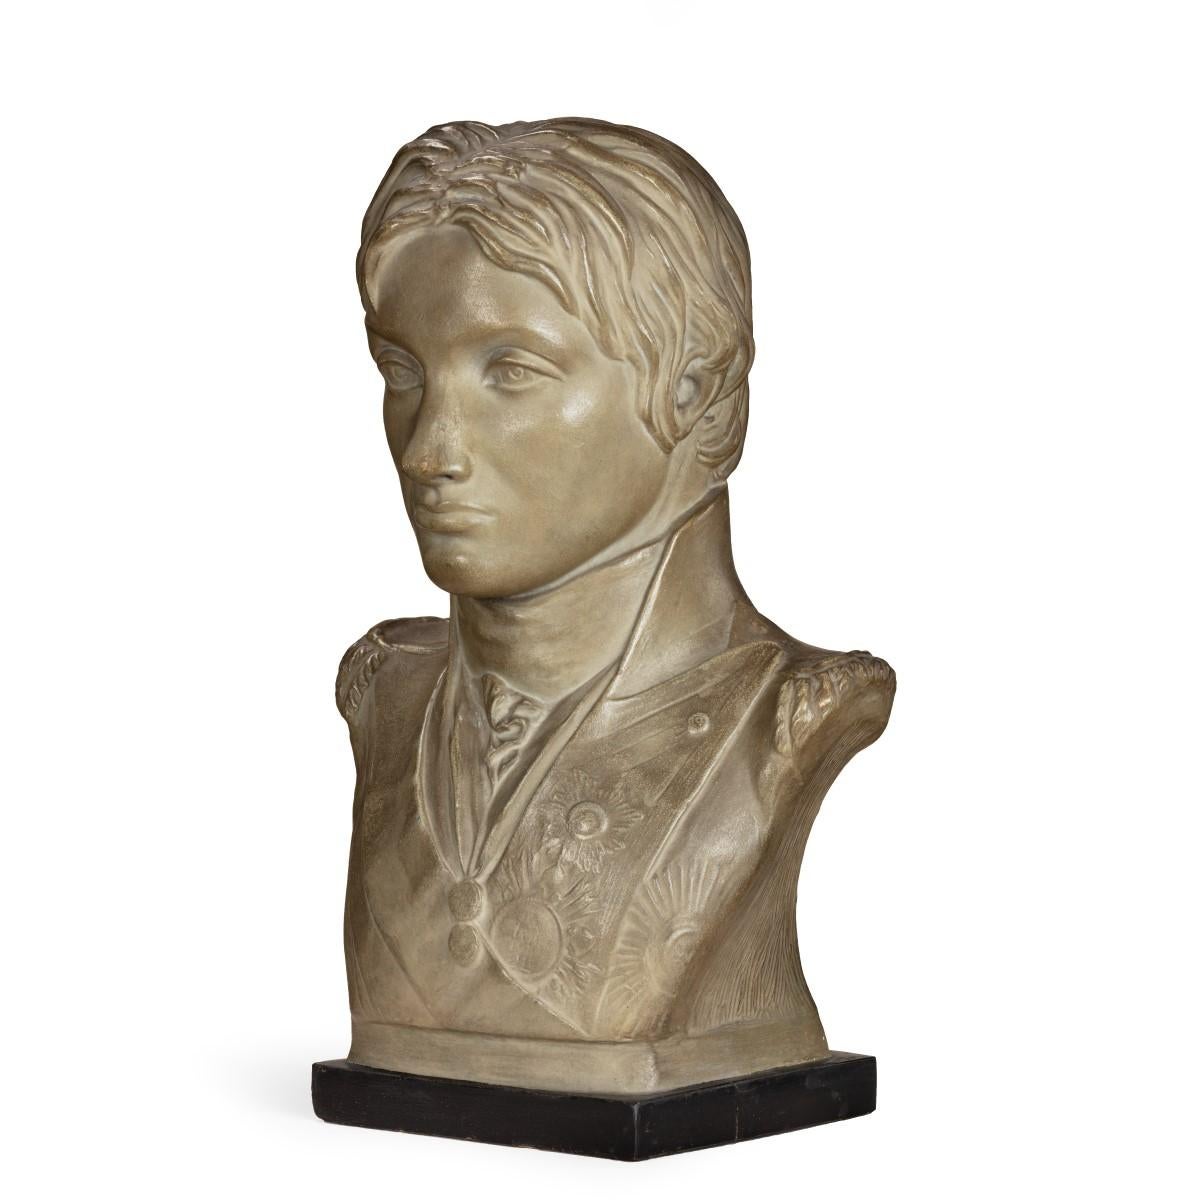 This bust of Admiral Lord Nelson was probably produced by Bartholomew Papera after the 1798 marble bust by Anne Seymour Damer. The reverse is impressed, ‘Anna S. Damer Fecit’ and ‘Pub. As the Act Dir’. Incomplete paper label on the integral black